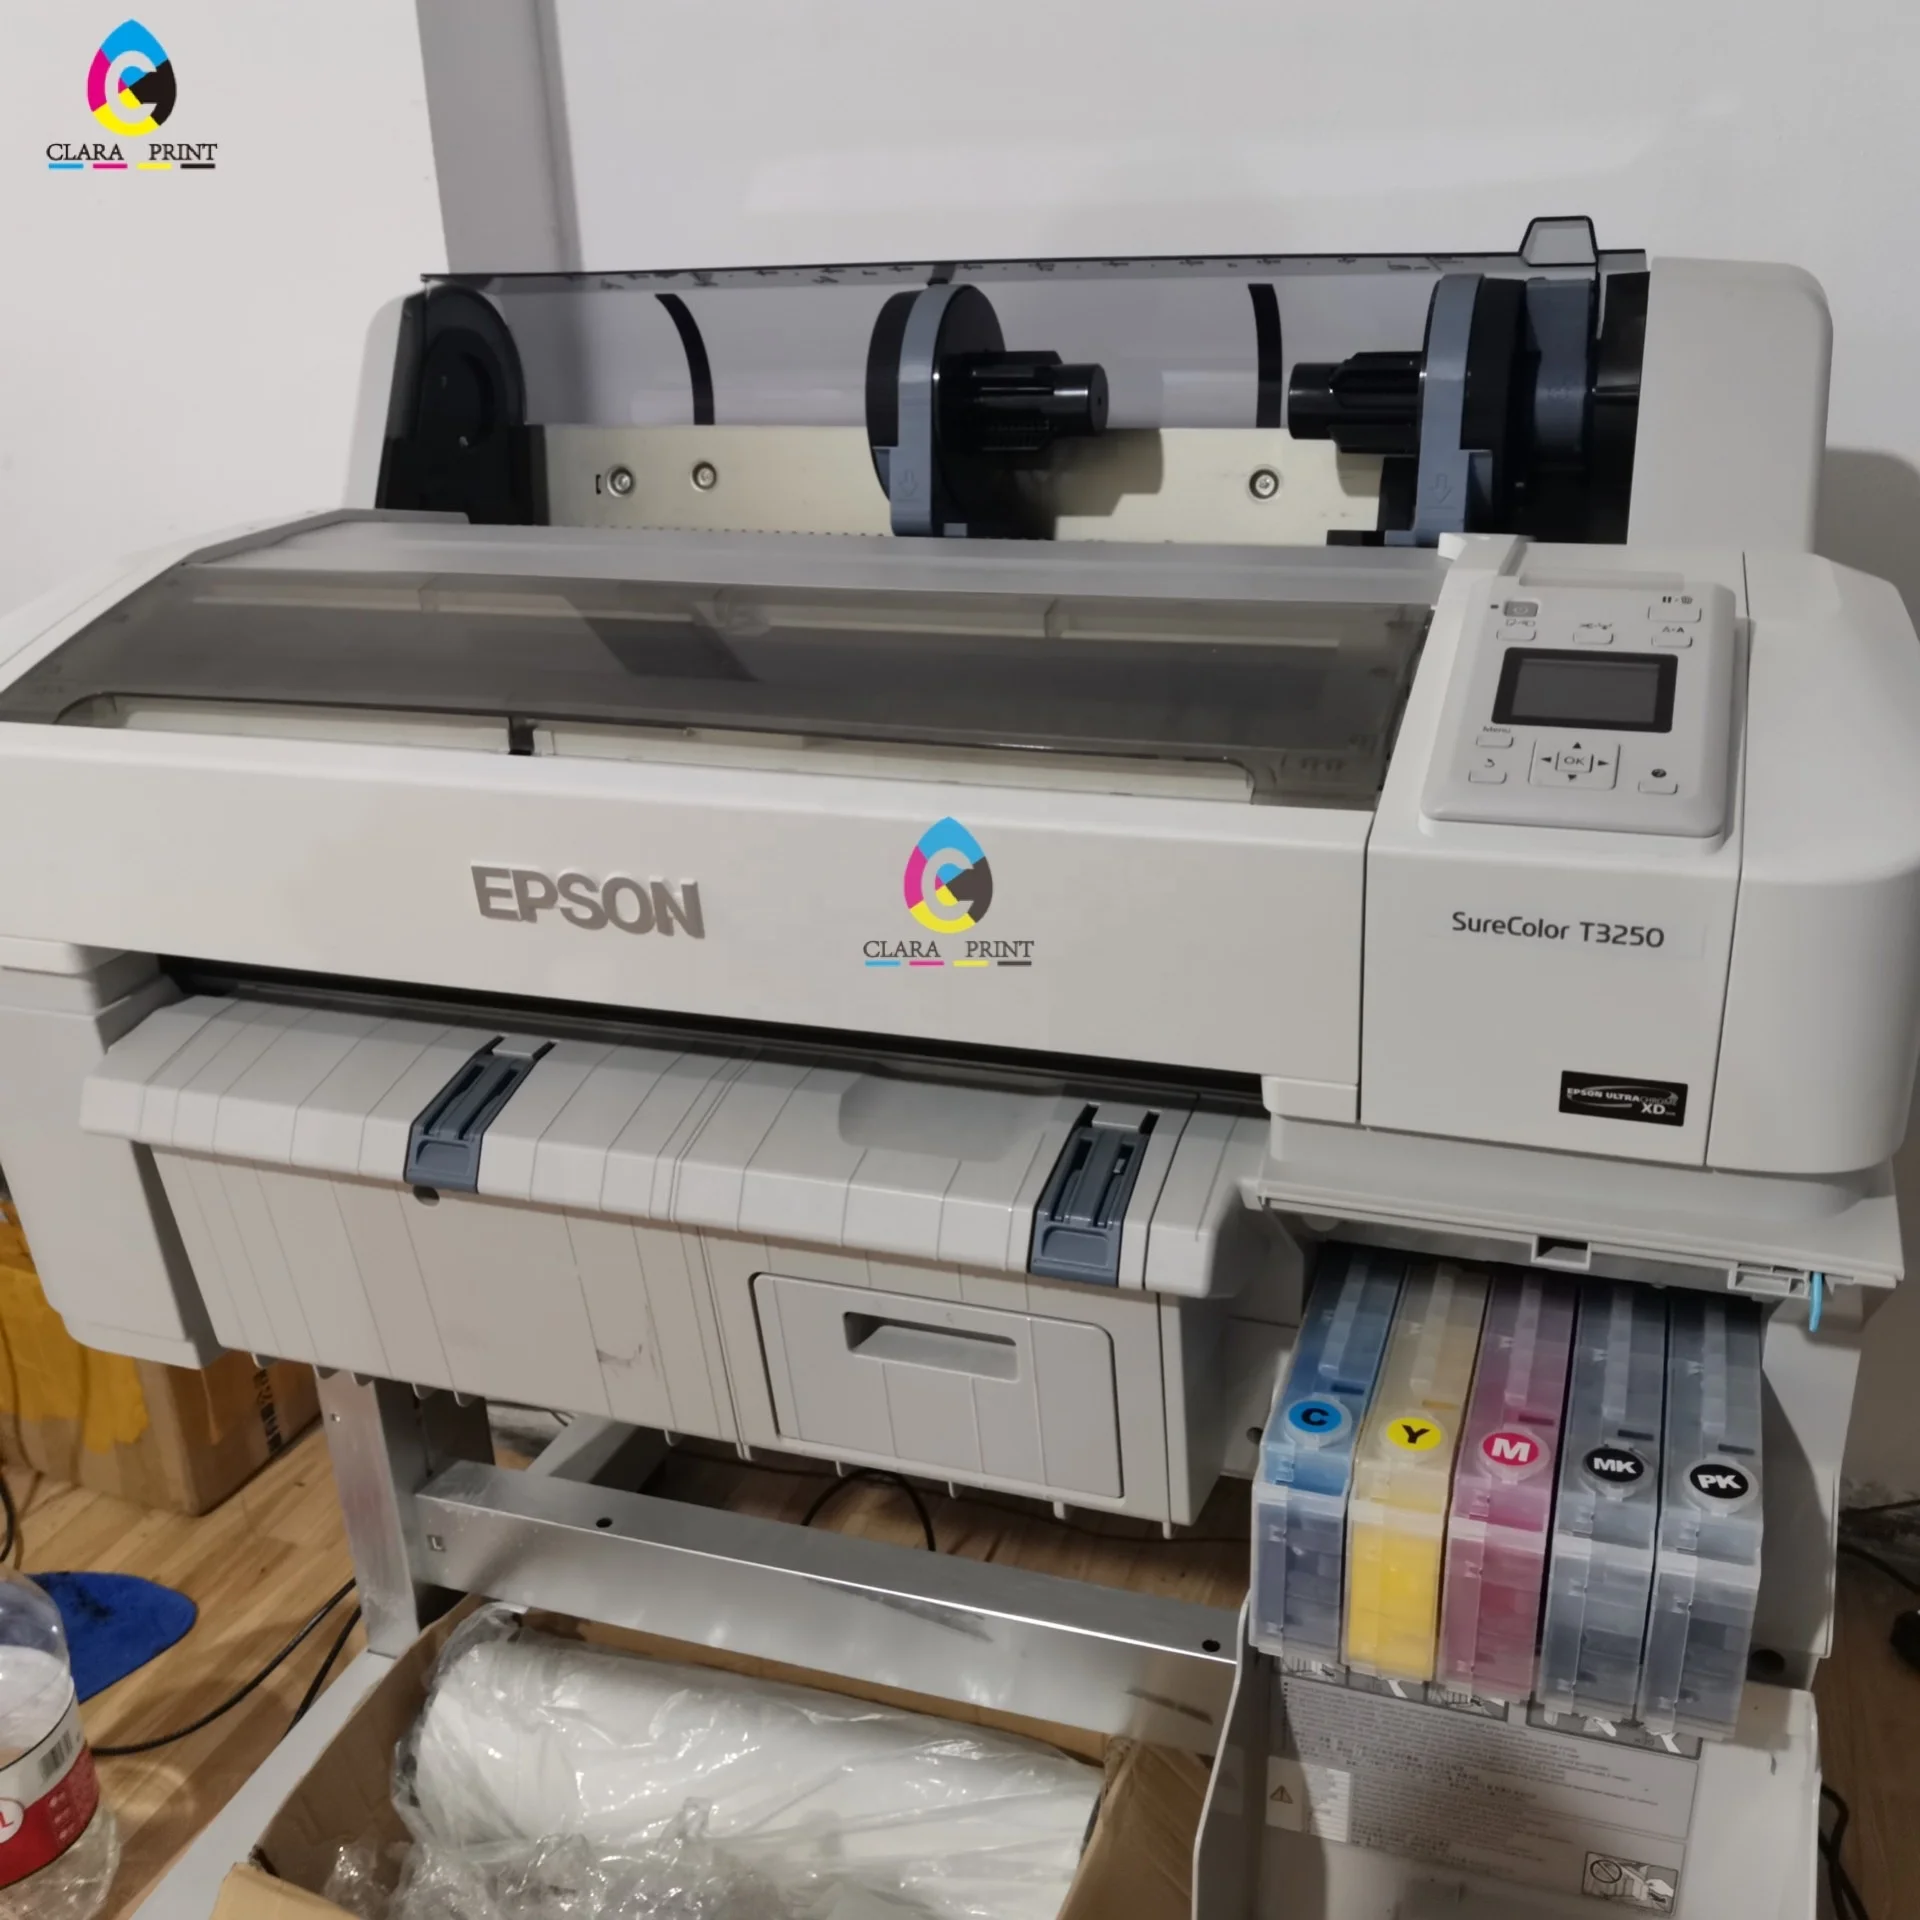 Old Model Eps A1 Plus Compatible Printer Sc-t3250 All In Good Condition -  Buy Sure-color T3250,A1 Inkjet Printer Product on Alibaba.com